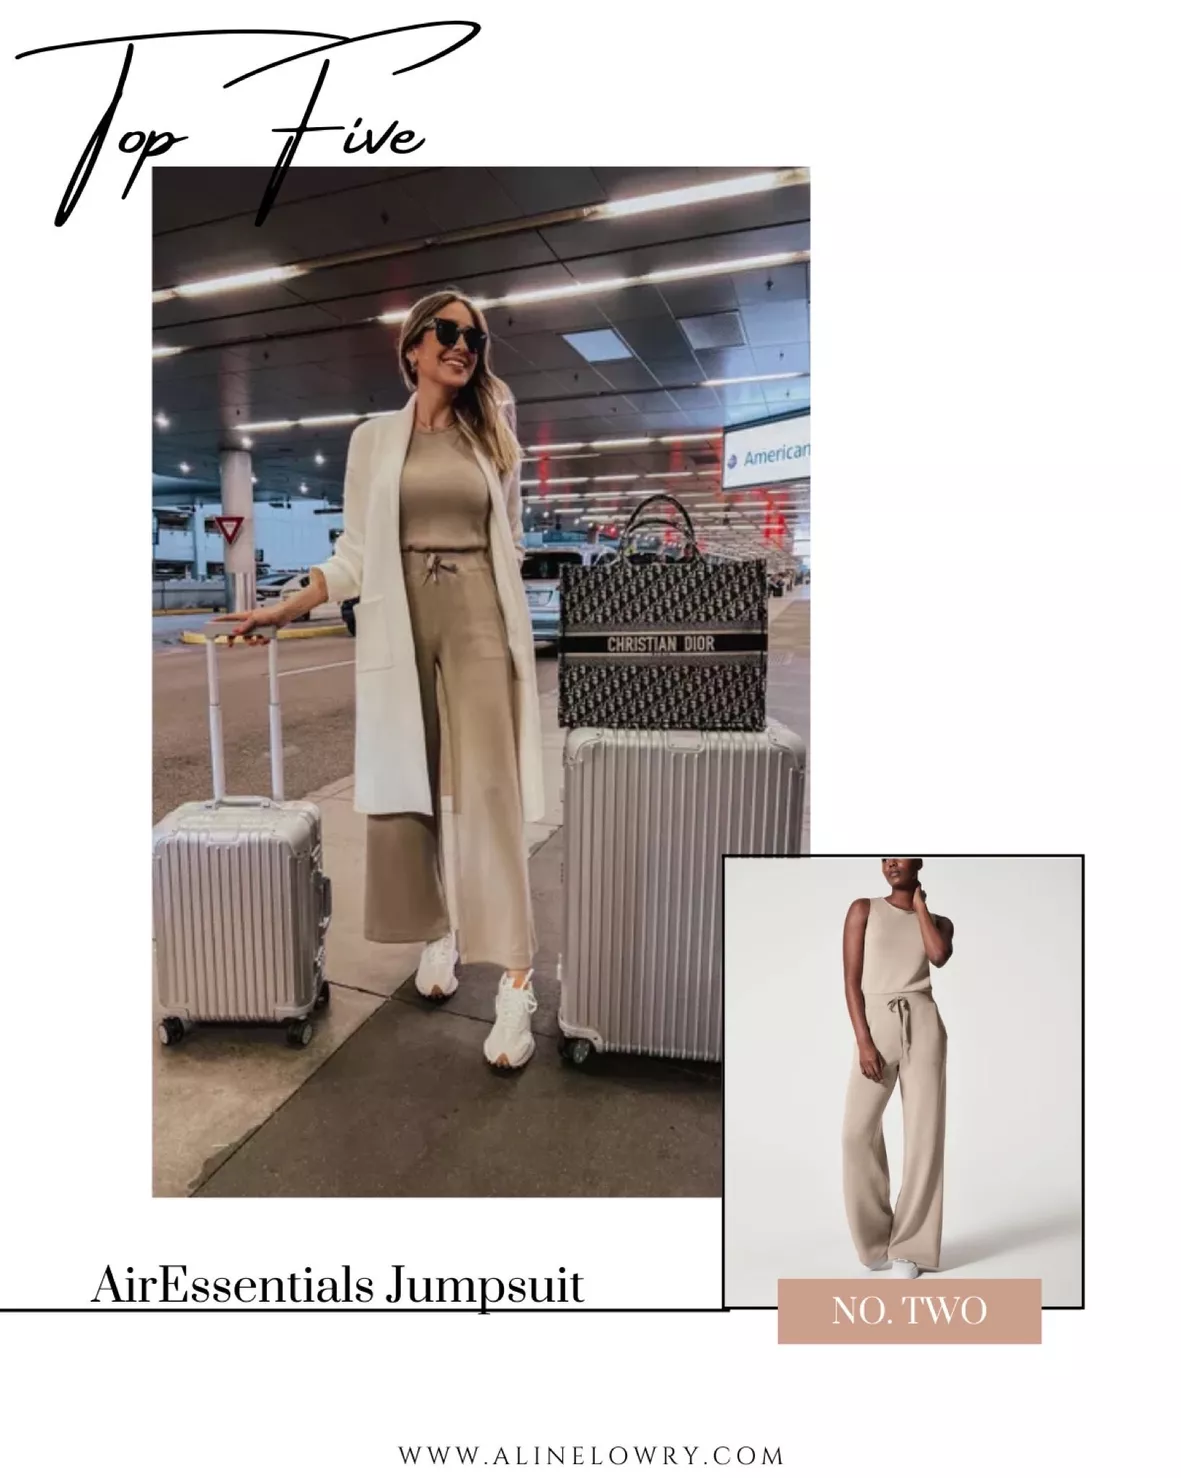 Traveling comfortable and in style ✈️ This jumpsuit is PERFECT